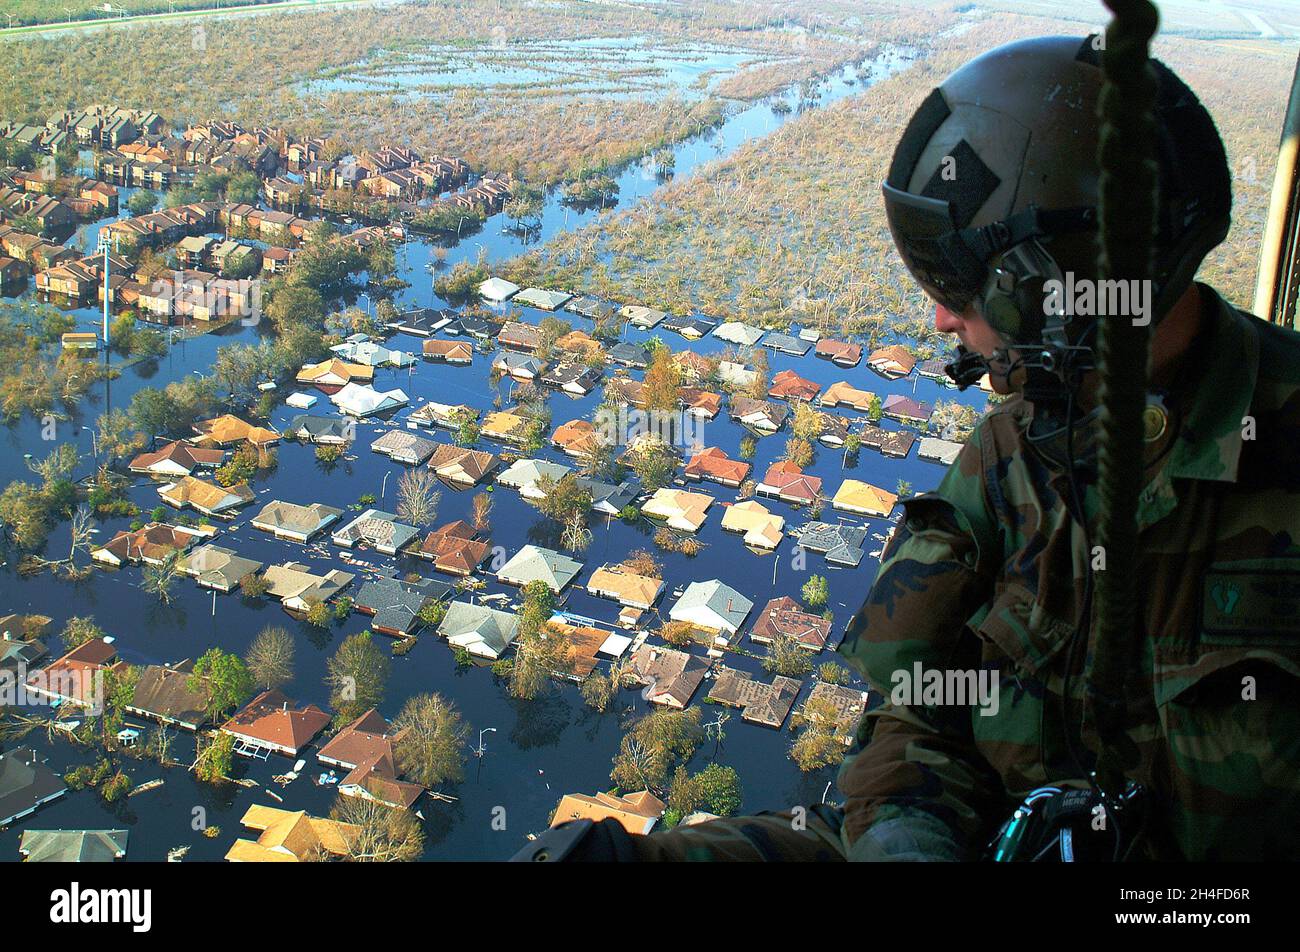 NEW ORLEANS, LOUISIANA, USA - 04 September 2005 - Tech. Sgt. Keith Berry looks down into the flooded streets of New Orleans to search for survivors. H Stock Photo